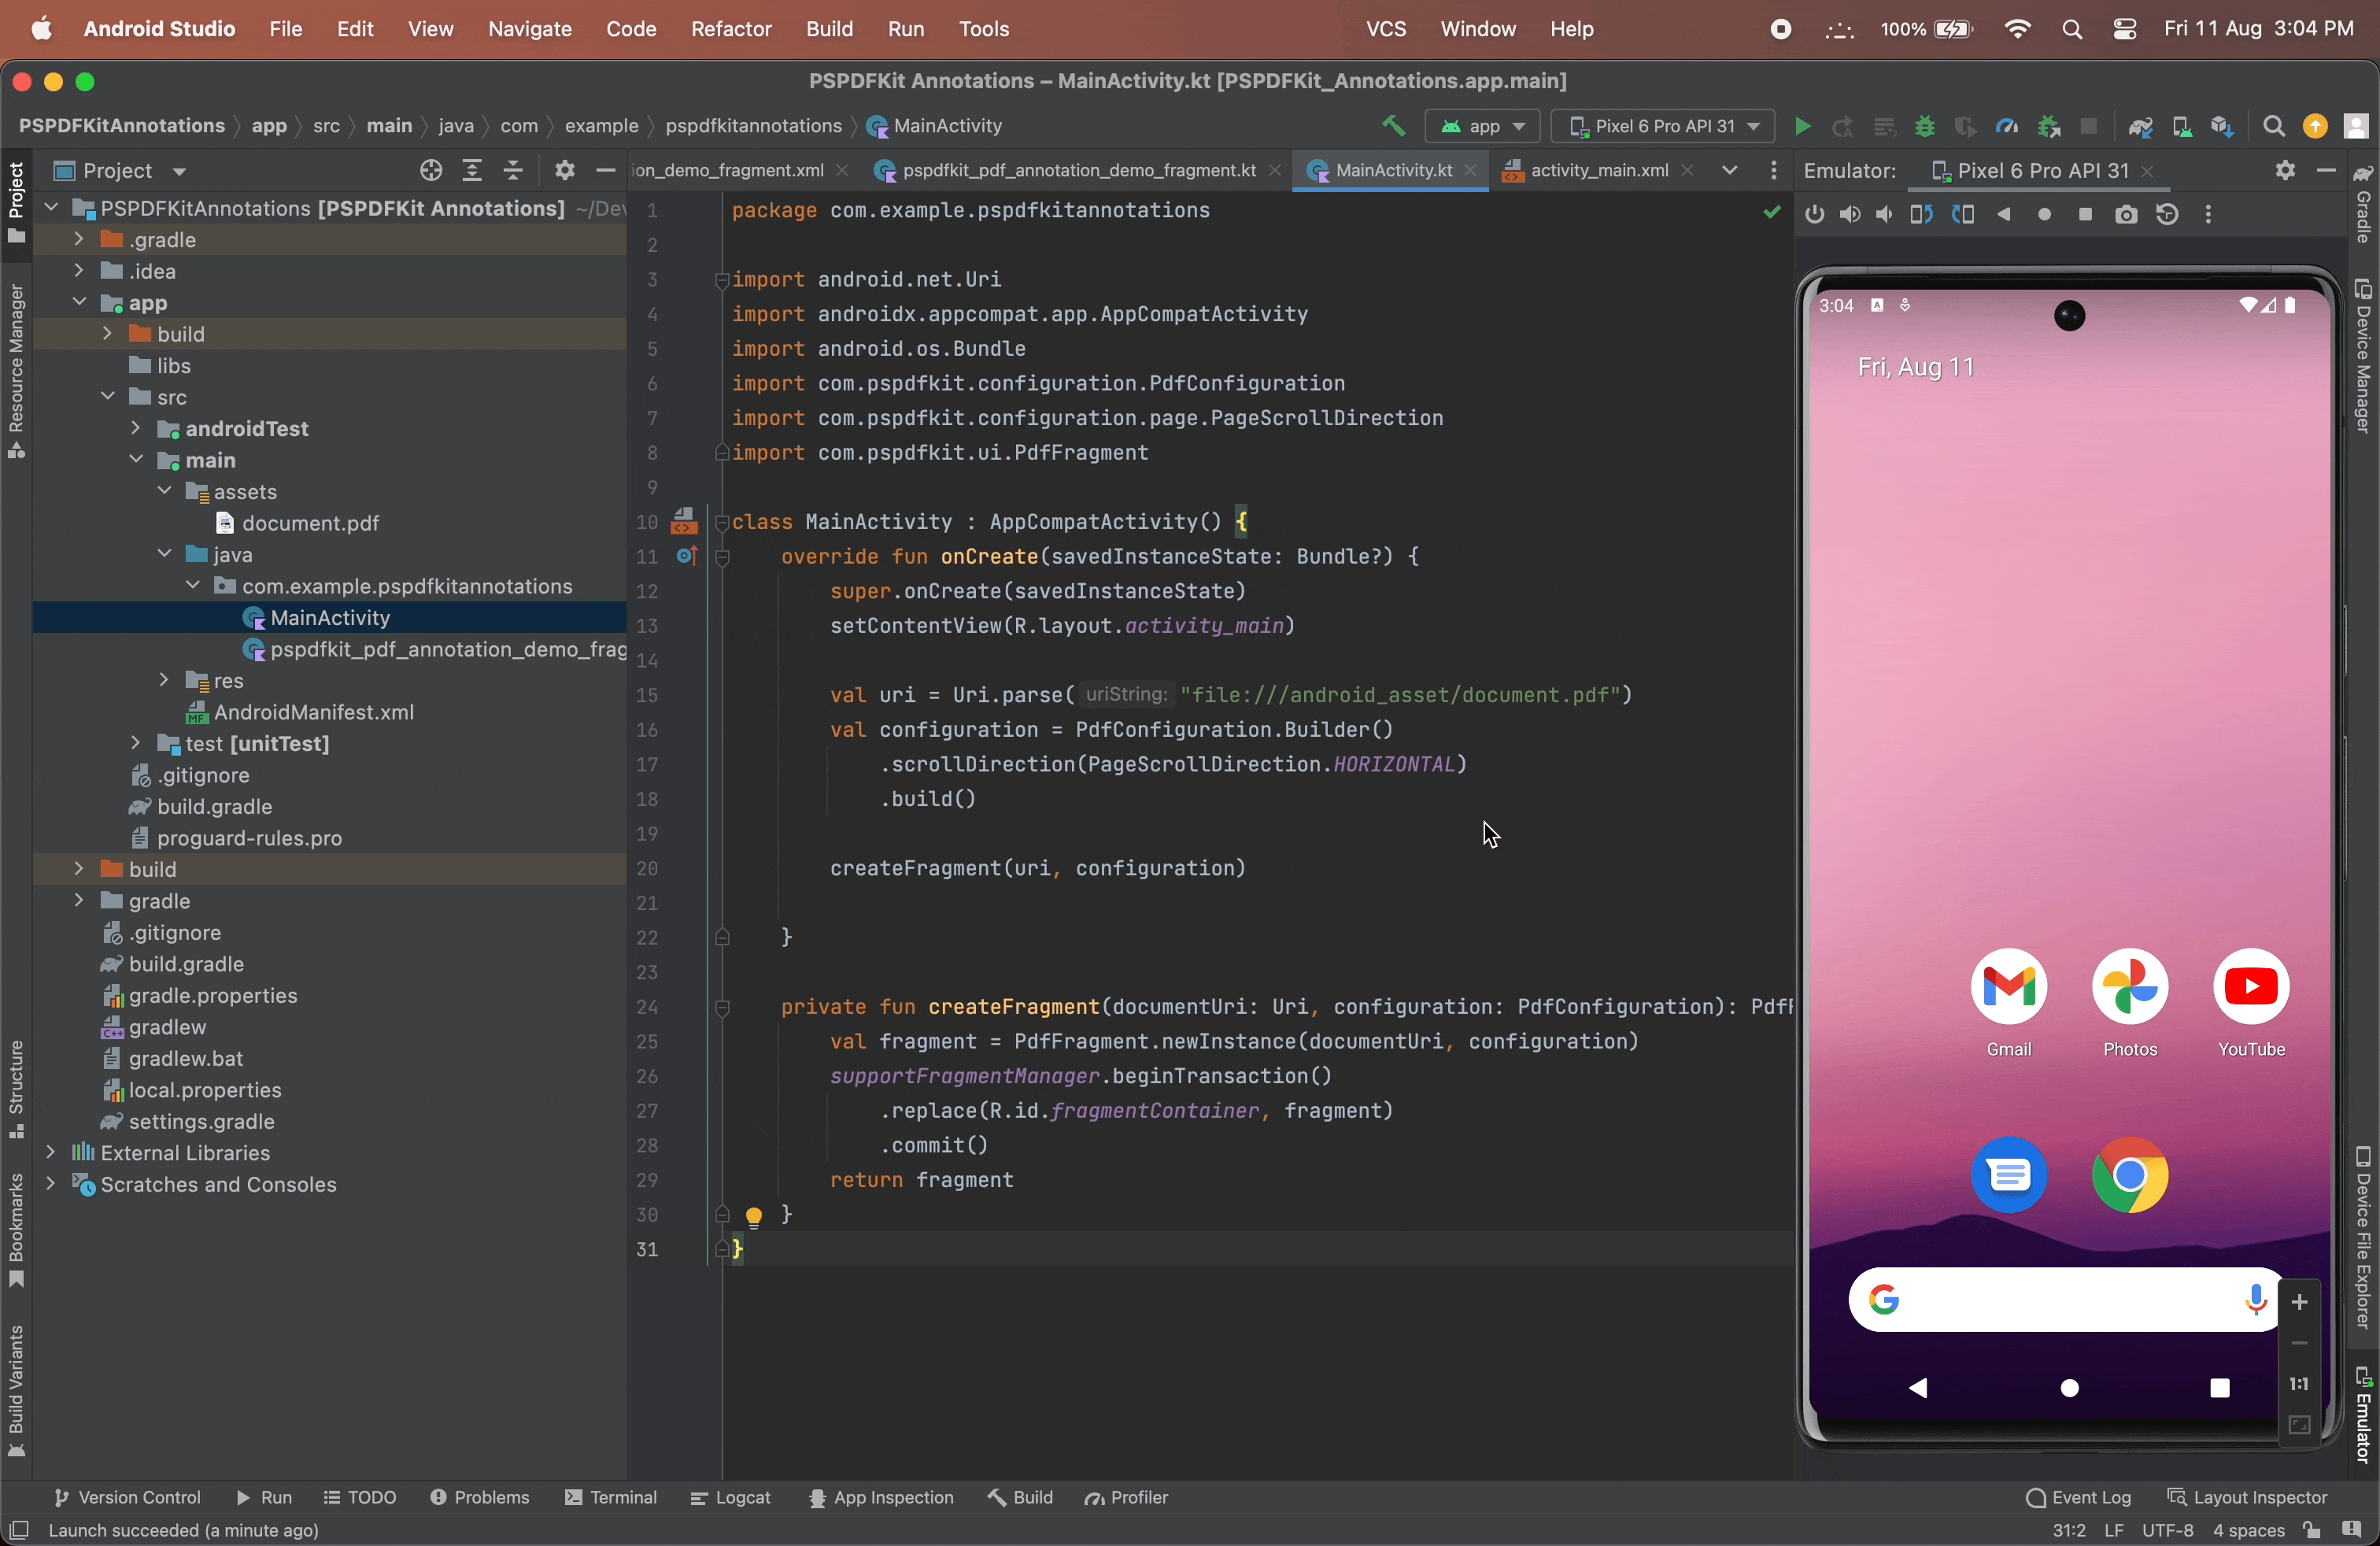 GIF showing the result of running the application in Android studio